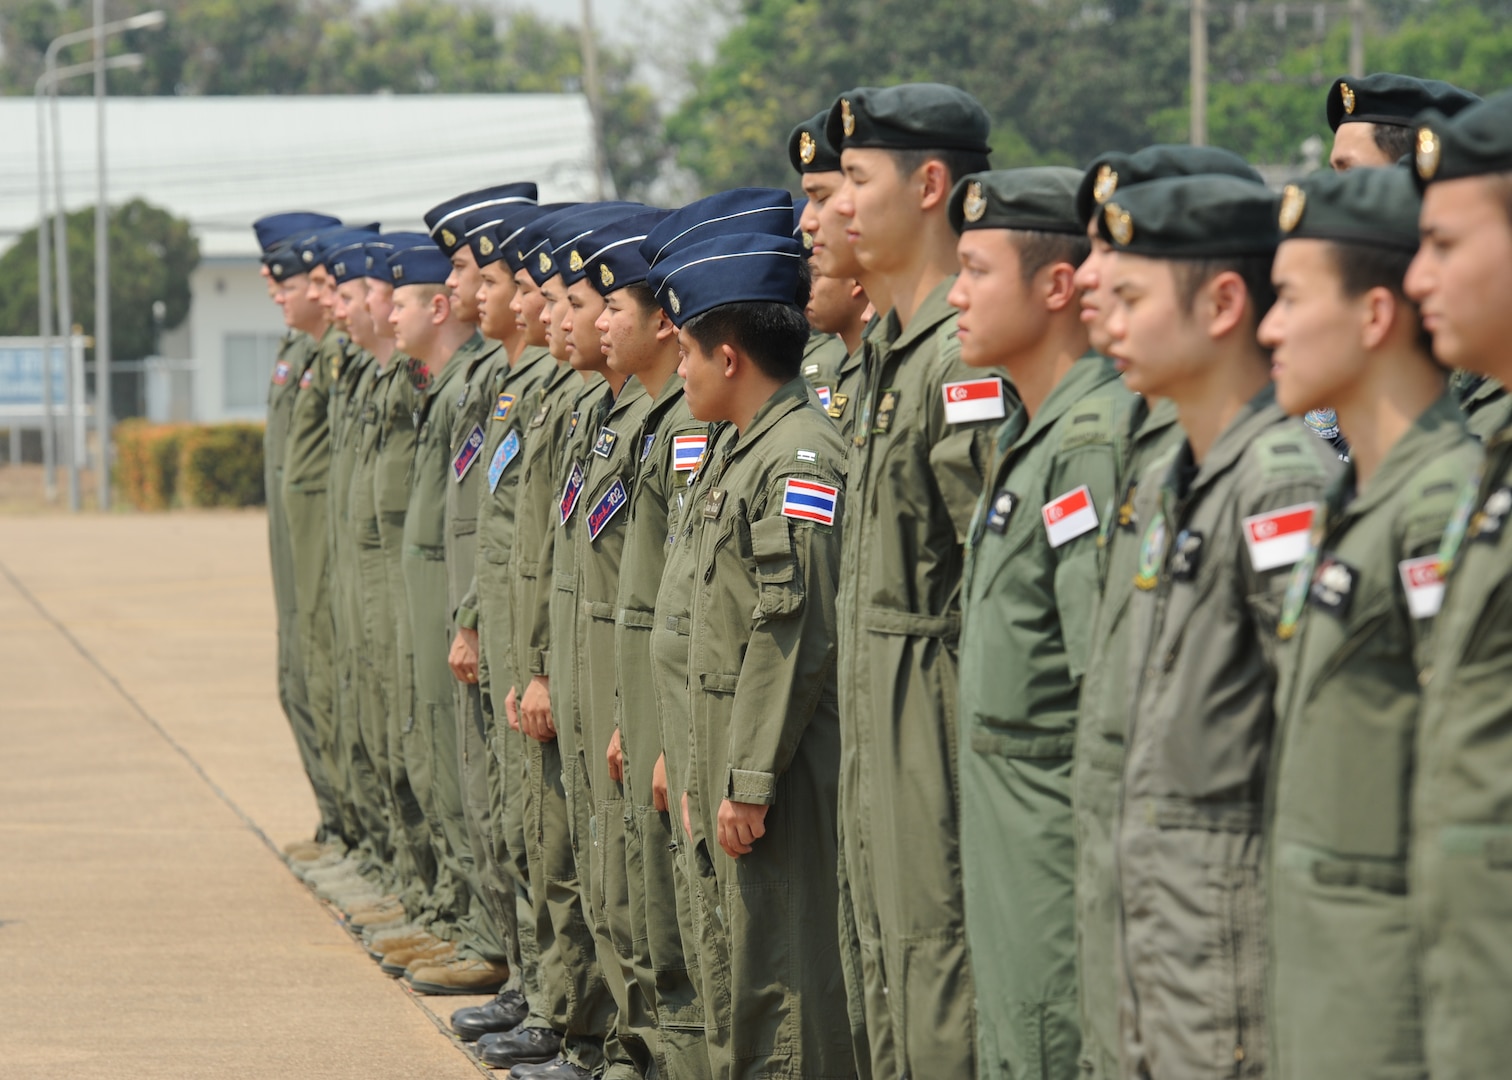 Pilots from the Republic of Singapore Air Force, the Royal Thai Air Force, and the U.S. Air Force stand in formation during the closing ceremony of Exercise Cope Tiger 16 on Korat Royal Thai Air Force Base, Thailand, March 18, 2016. The multilateral exercise involved a combined total of 87 aircraft that completed 1,003 sorts of a two week period. Exercise Cope Tiger 16 included over 1,200 personnel from three countries and continues the growth of strong, interoperable and beneficial relationships within the Asia-Pacific Region, while demonstrating U.S. capability to project forces strategically in a combined, joint environment. (U.S. Air Force Photo by Tech Sgt. Aaron Oelrich/Released)